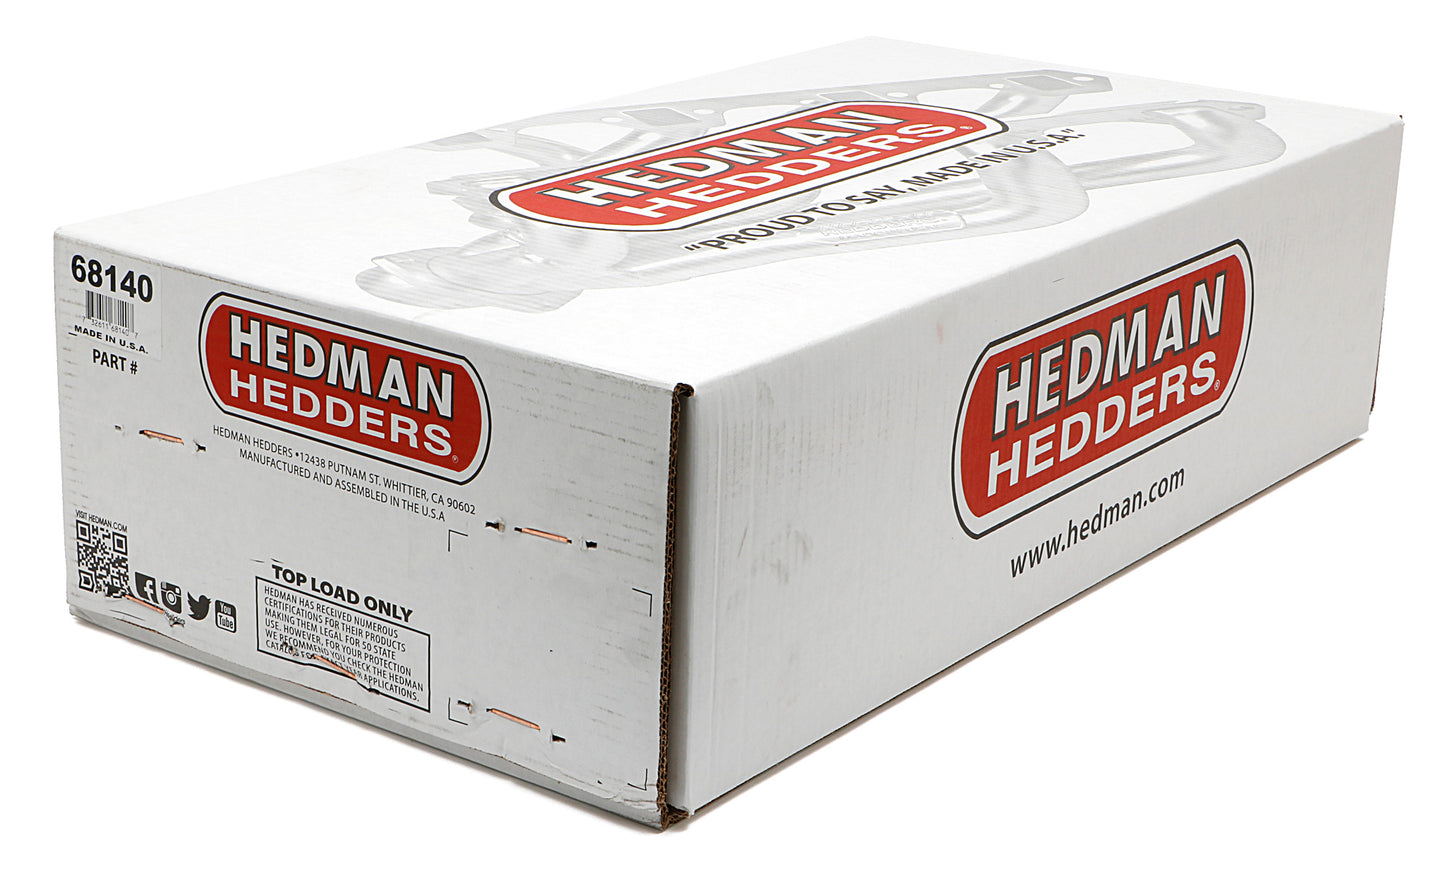 Hedman Hedders HEDMAN HEADERS 1968-72 CHEVELLE/EL CAMINO (AND RELATED A-BODIES) LS SWAP HEADERS; AUTO TRANSMISSION; 1-3/4 IN. MID-LENGTH TUBE; 3 IN. BALL/SOCKET COLLECTOR- UNCOATED 68140